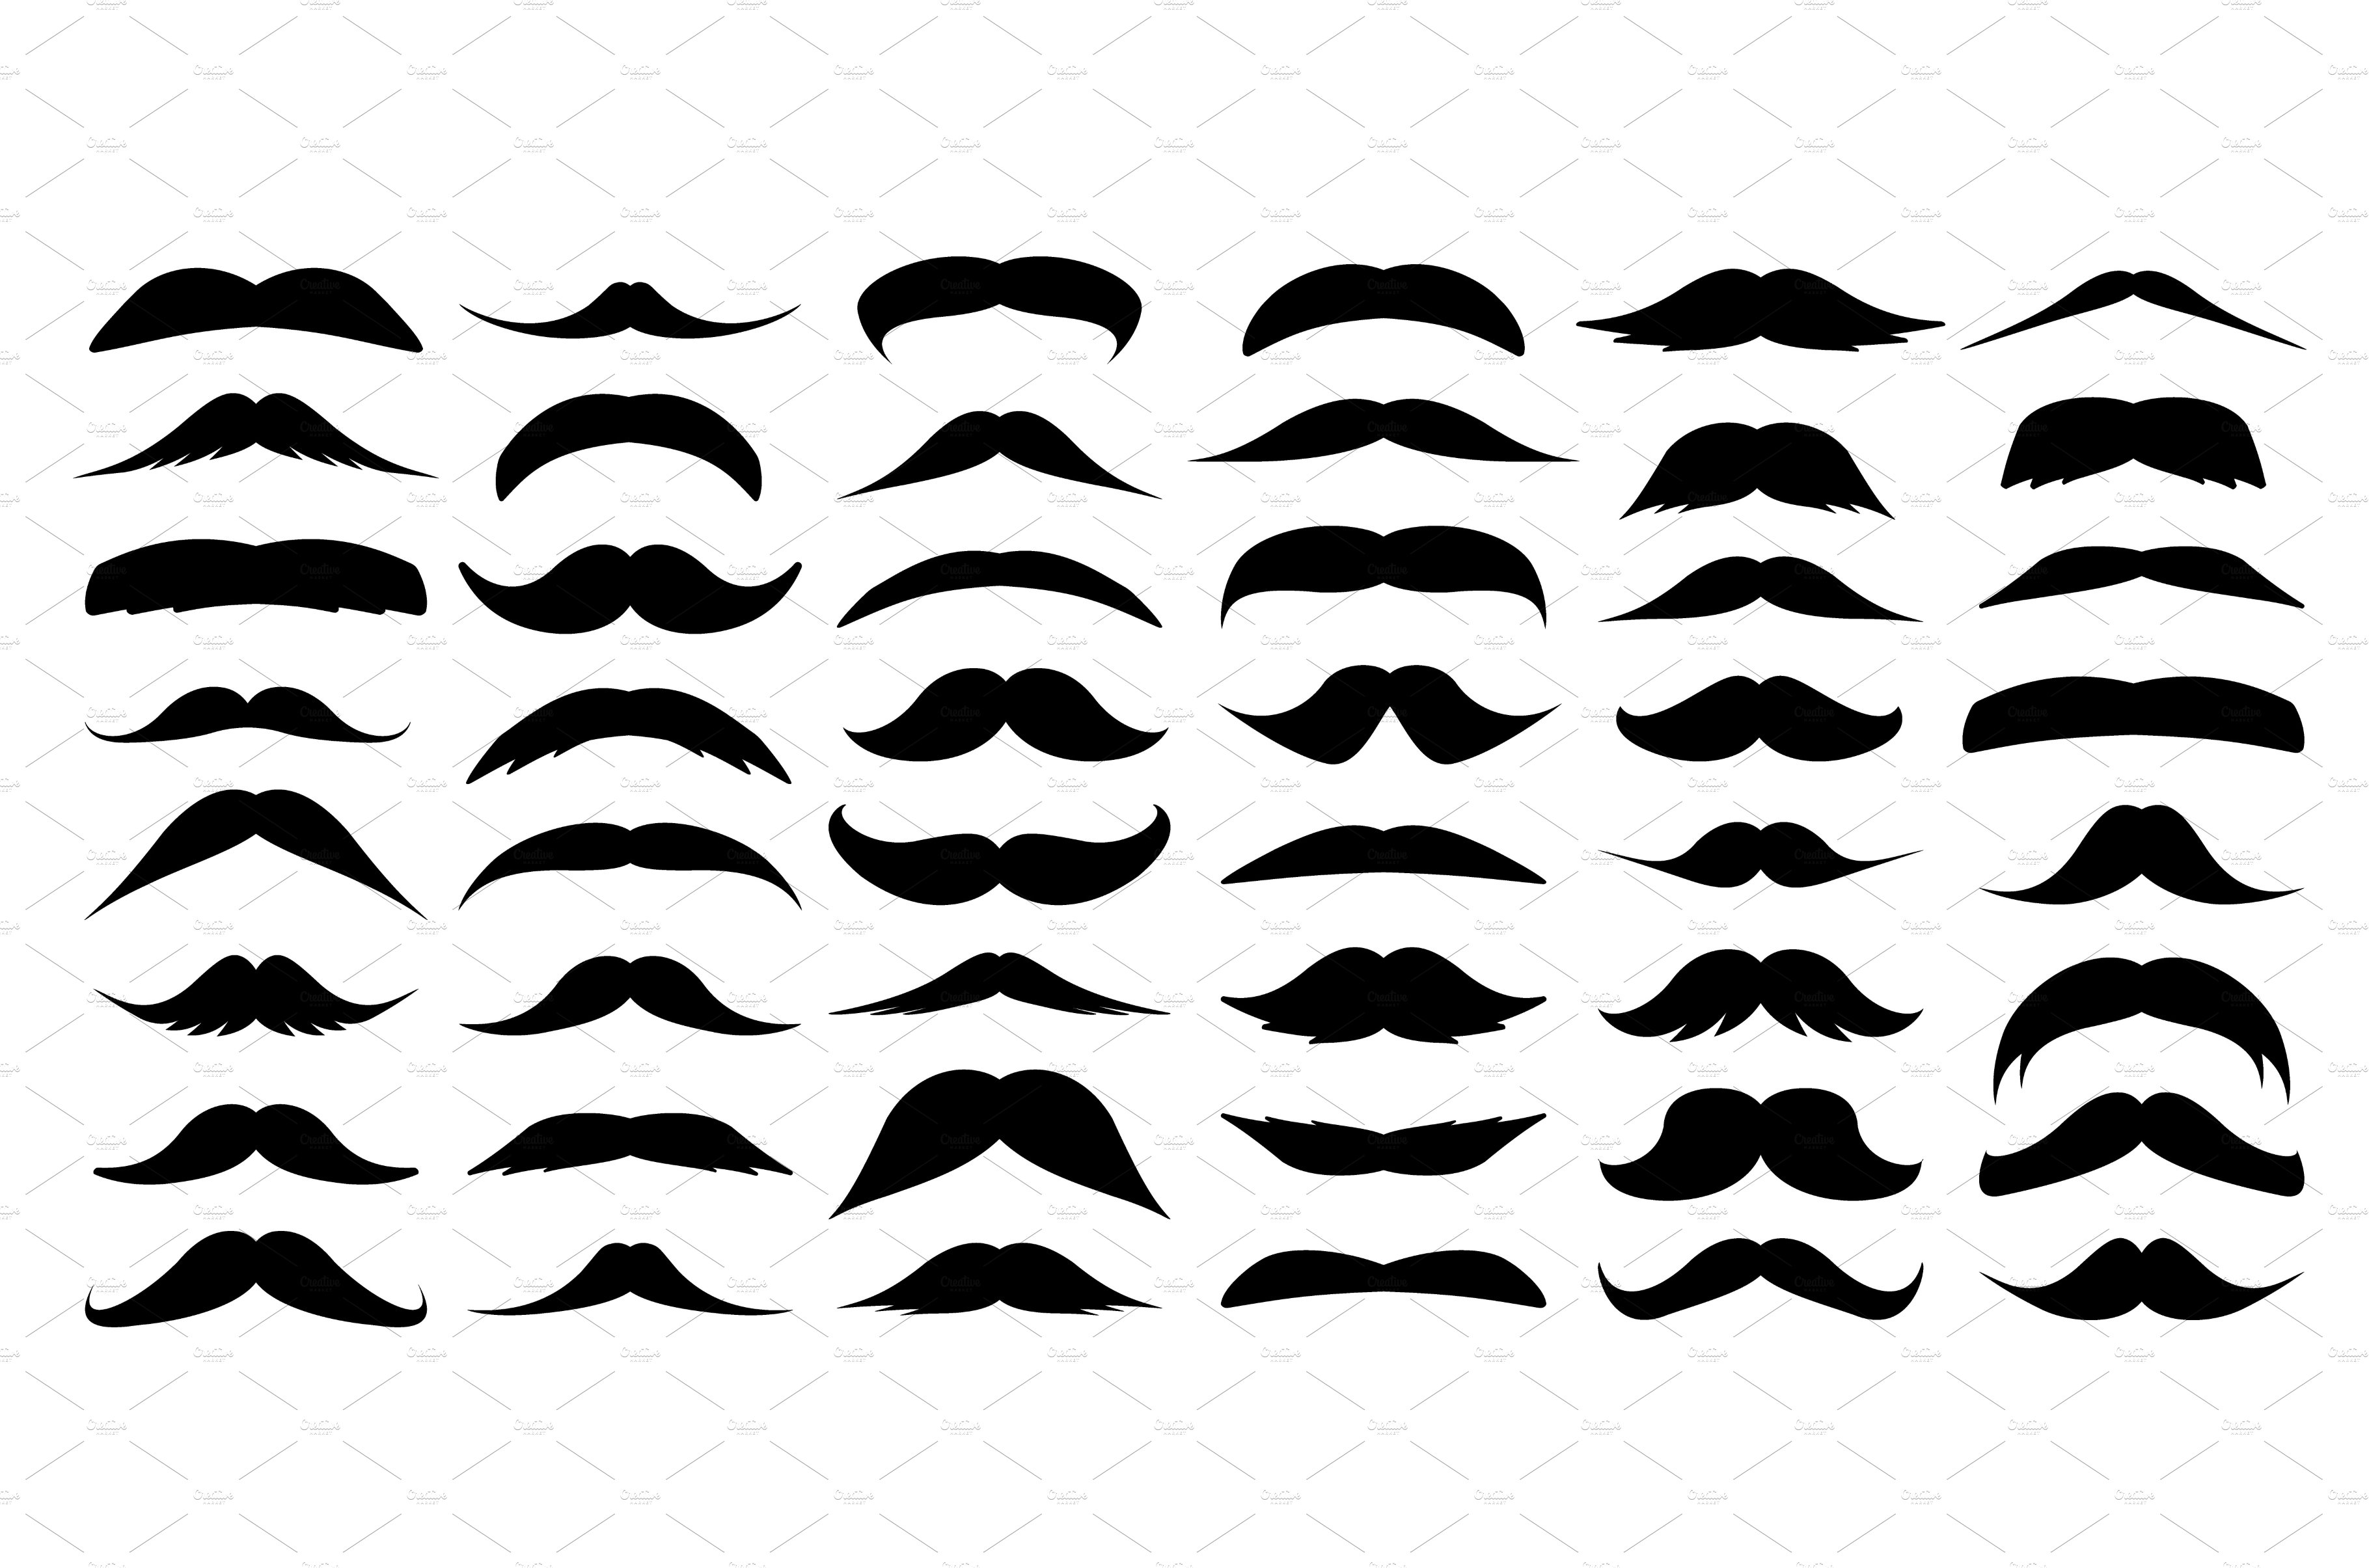 Mustache collection. Vintage cover image.